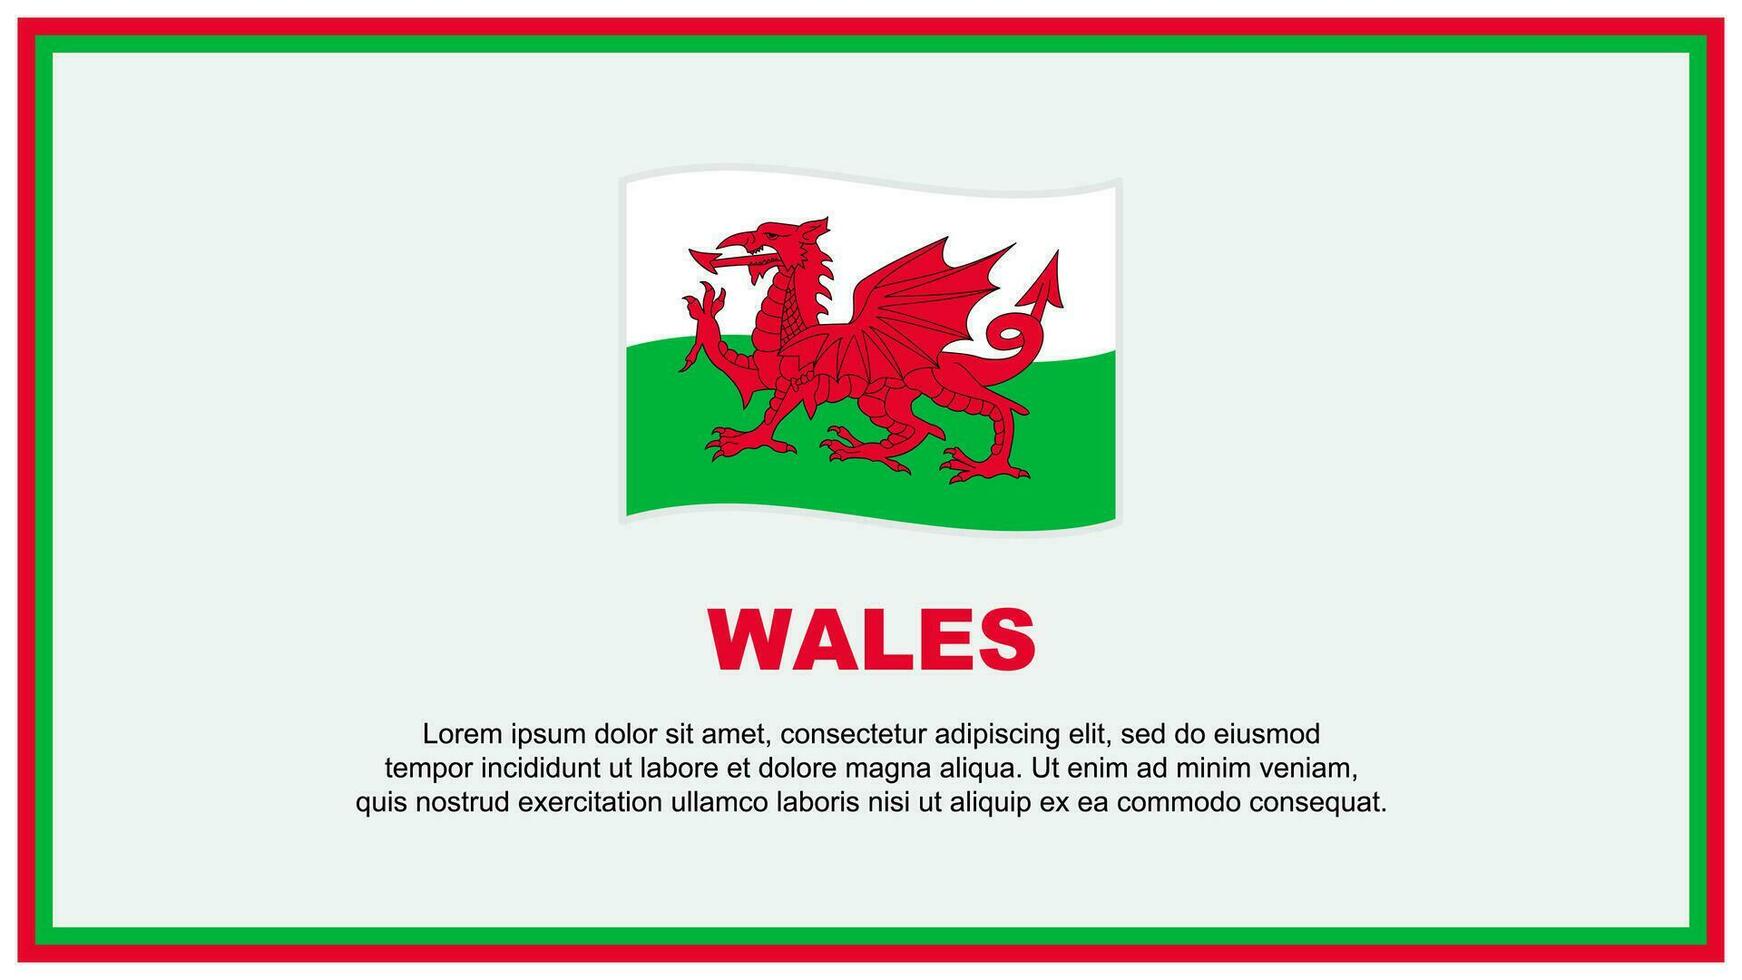 Wales Flag Abstract Background Design Template. Wales Independence Day Banner Social Media Vector Illustration. Wales Banner